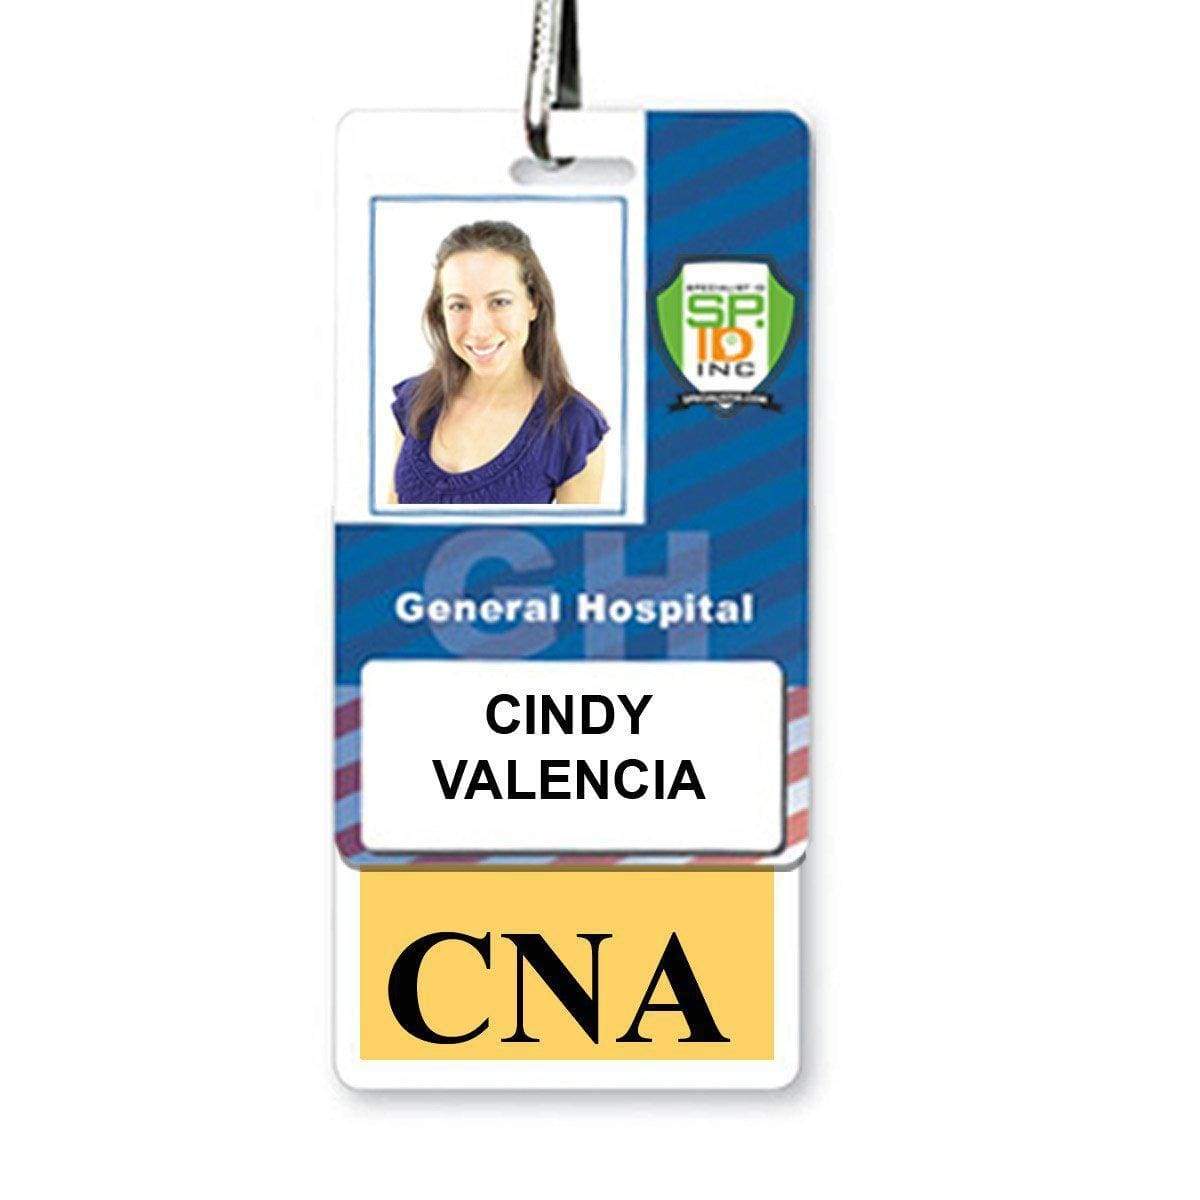 Cna BadgeBottom Badge Holder & Badge Buddy in One!! - Vertical ID Badge Sleeve with Bottom Role Tag for Nurse Assistants